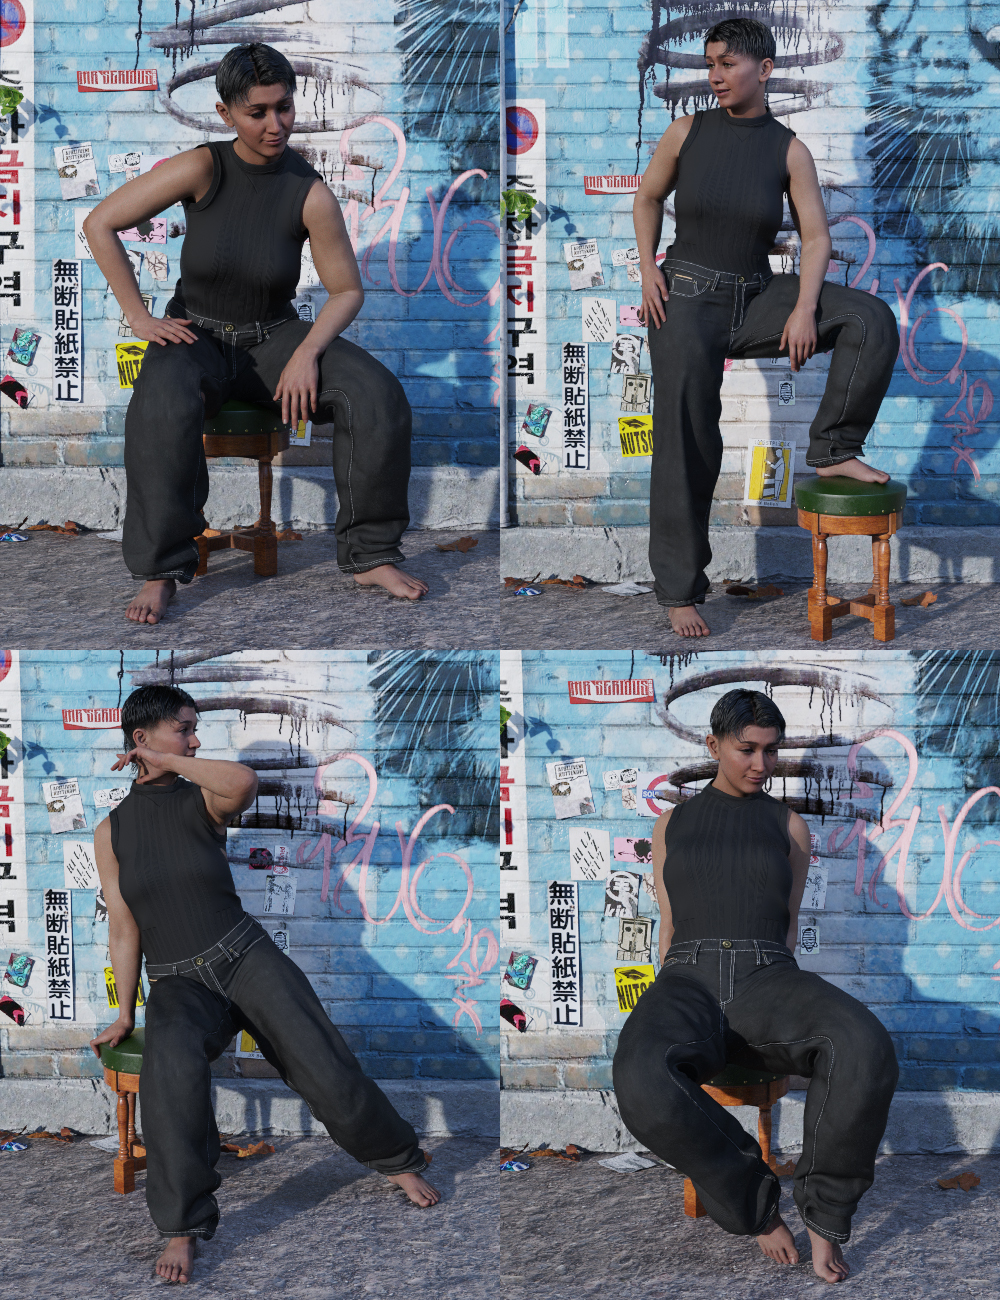 Take a Seat Catty Poses for Catty 8.1 and Genesis 8.1 Female by: EnsaryCharlie, 3D Models by Daz 3D